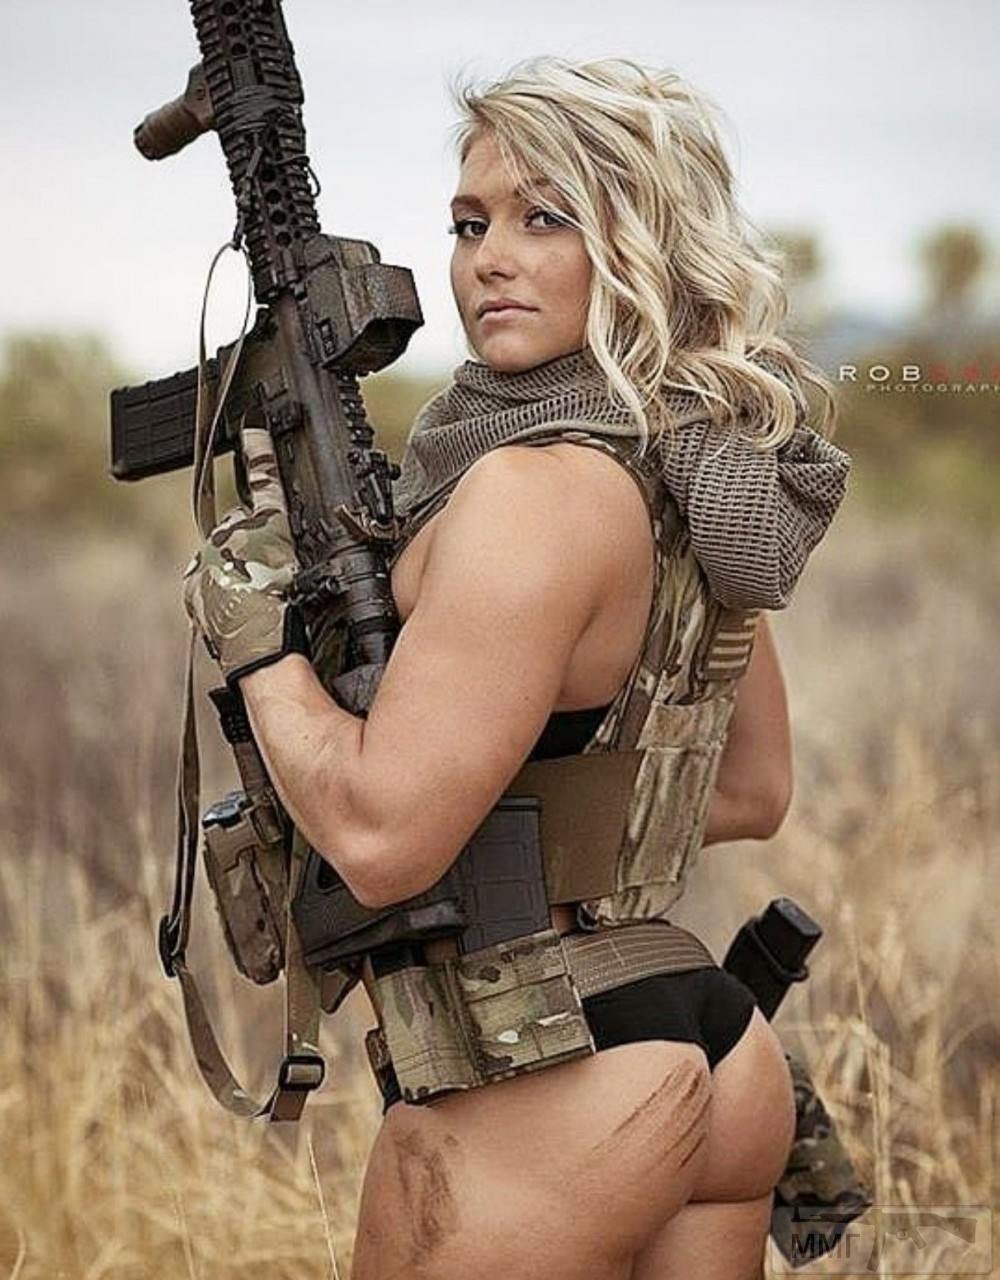 ashley staples add photo hot naked women with guns